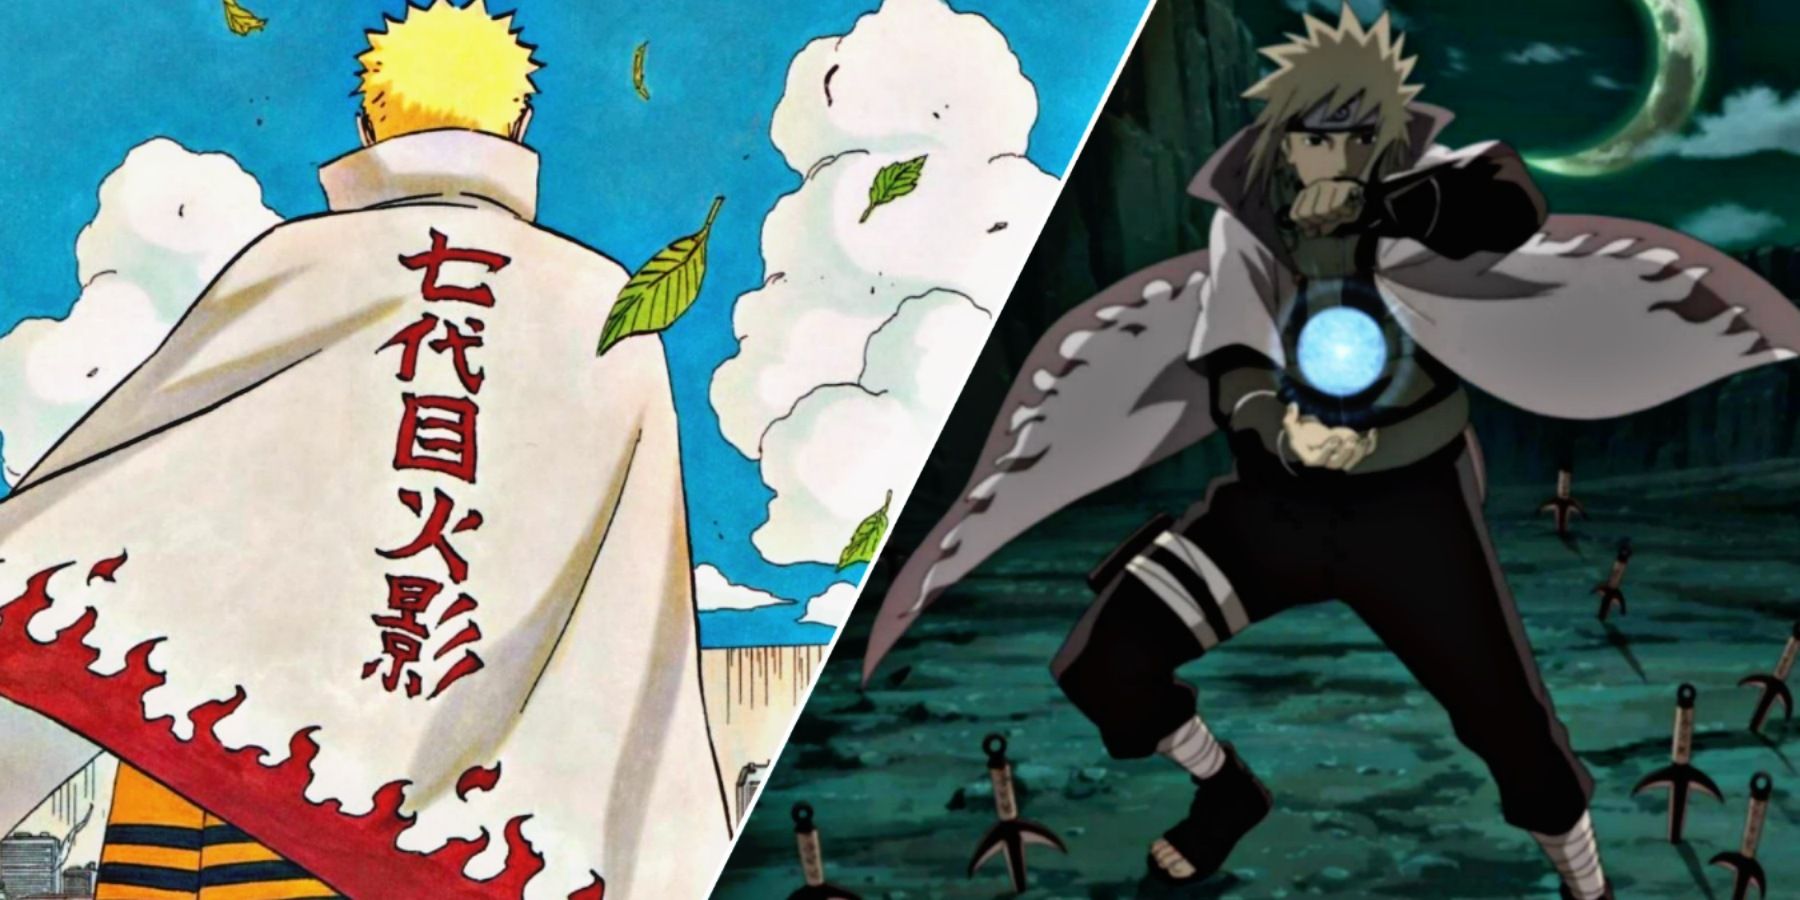 Was naruto the best hokage ? I'm asking this question in the sense